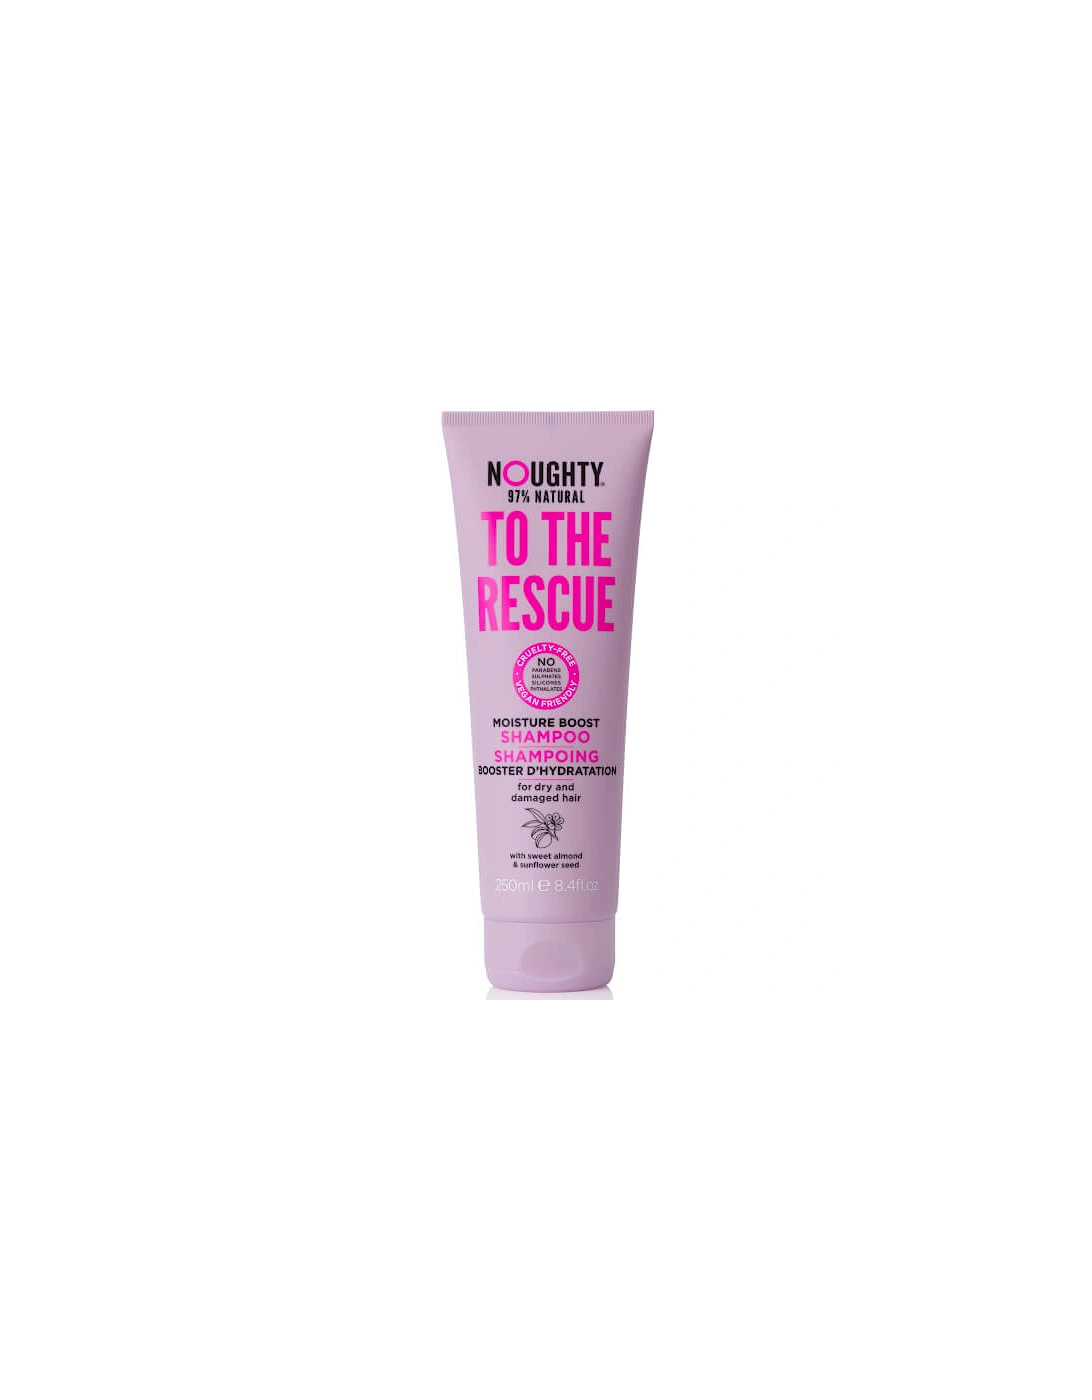 To The Rescue Shampoo 250ml - Noughty, 2 of 1